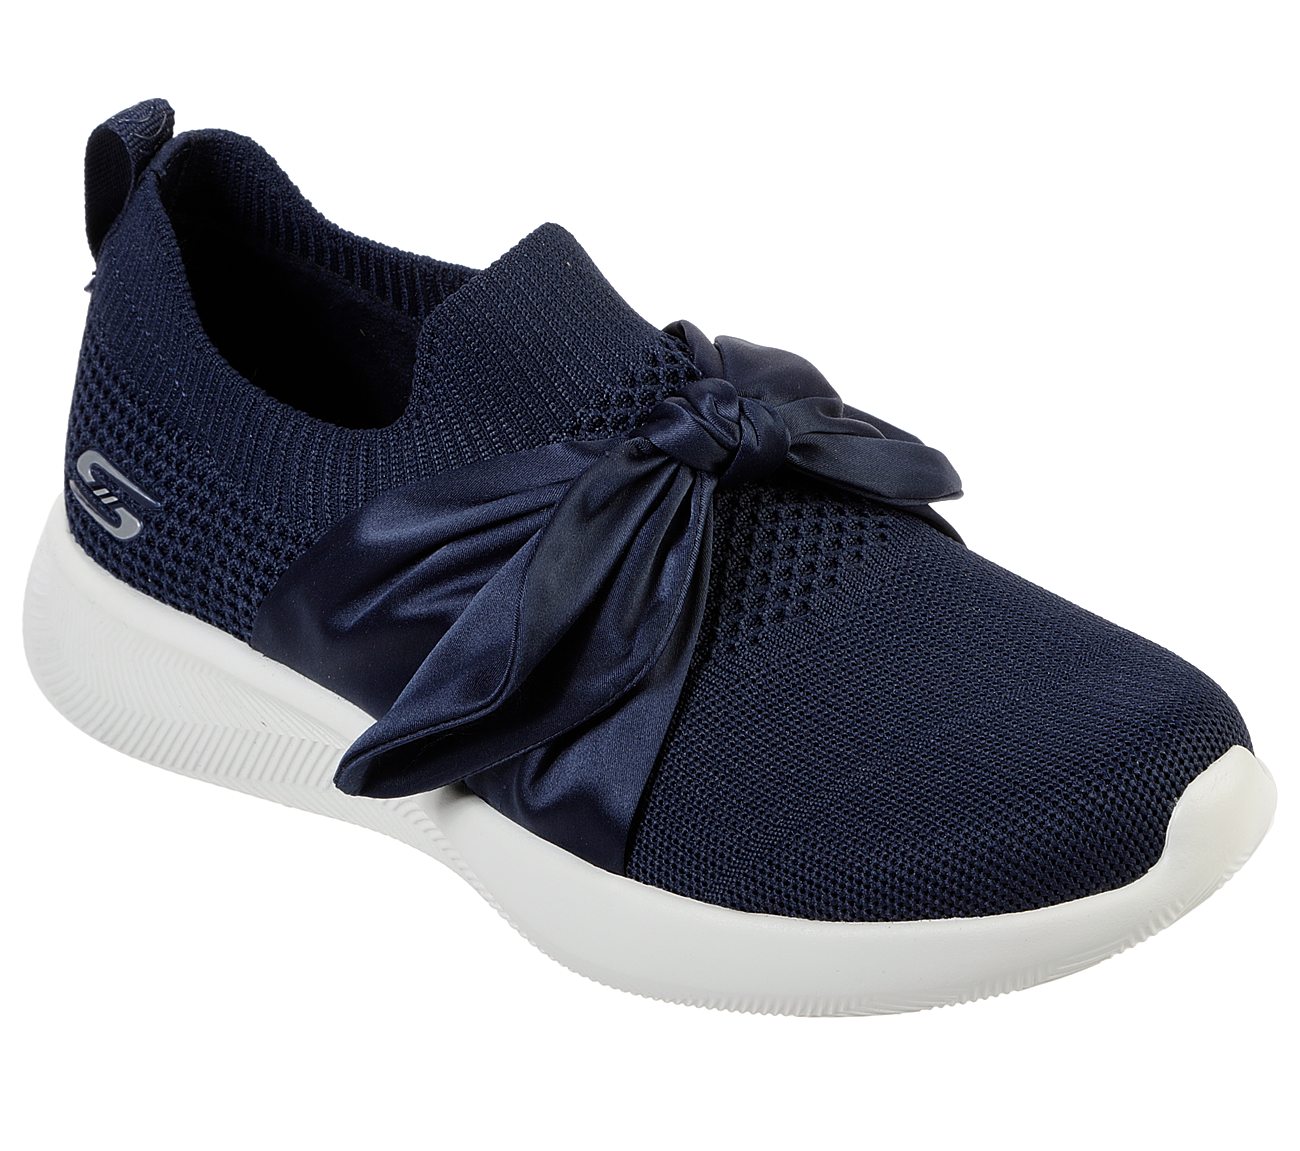 skechers sneakers with bow